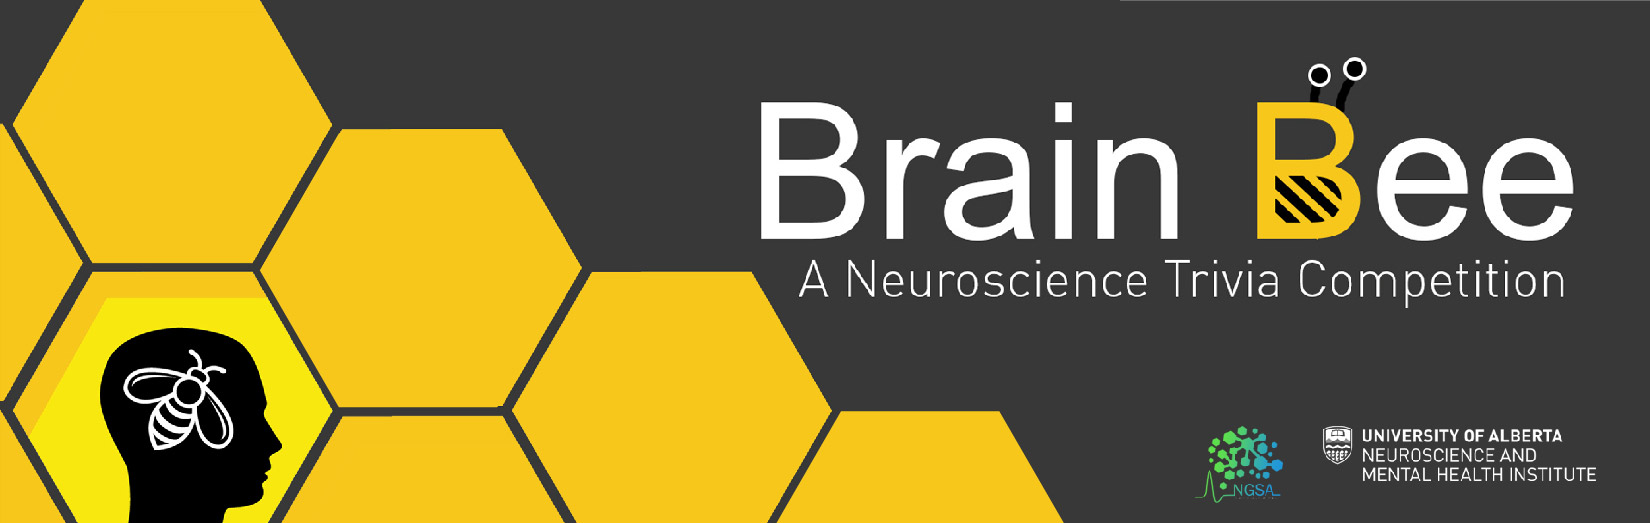 Brain Bee banner and page link